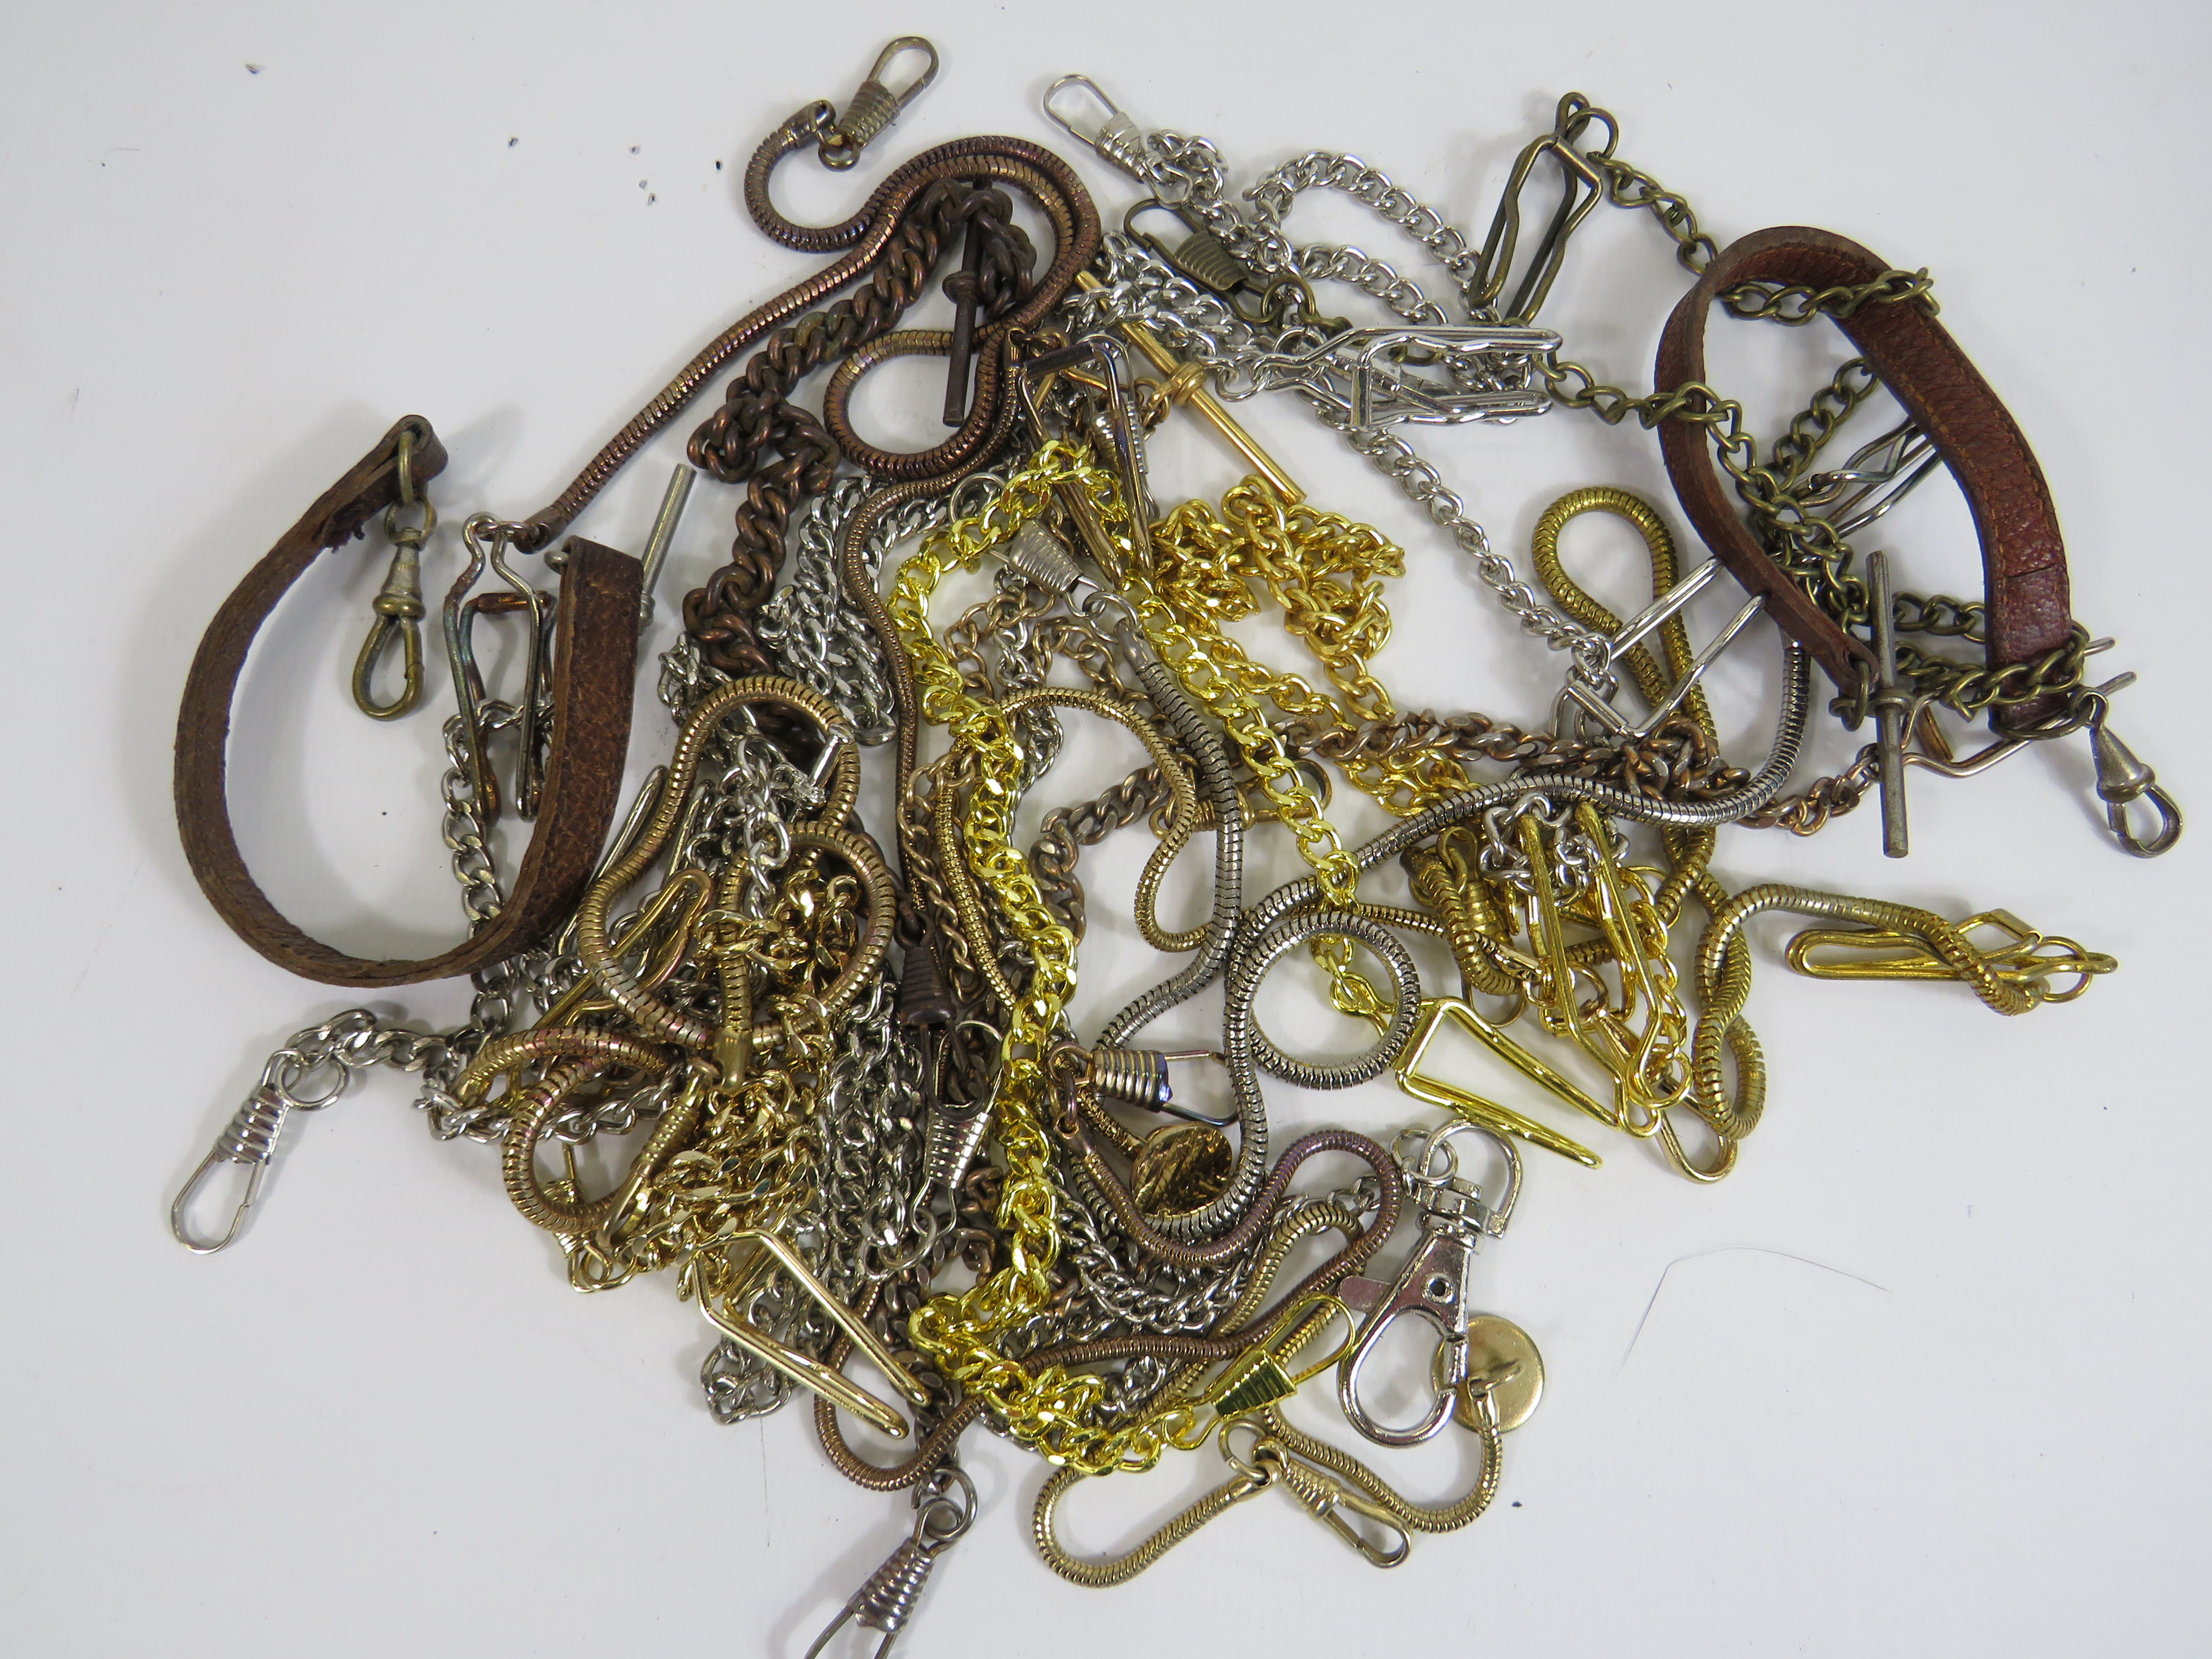 Job Lot Assorted POCKET WATCH CHAINS / ALBERTS Inc. Gold / Silver Tone Etc. x 20      406373